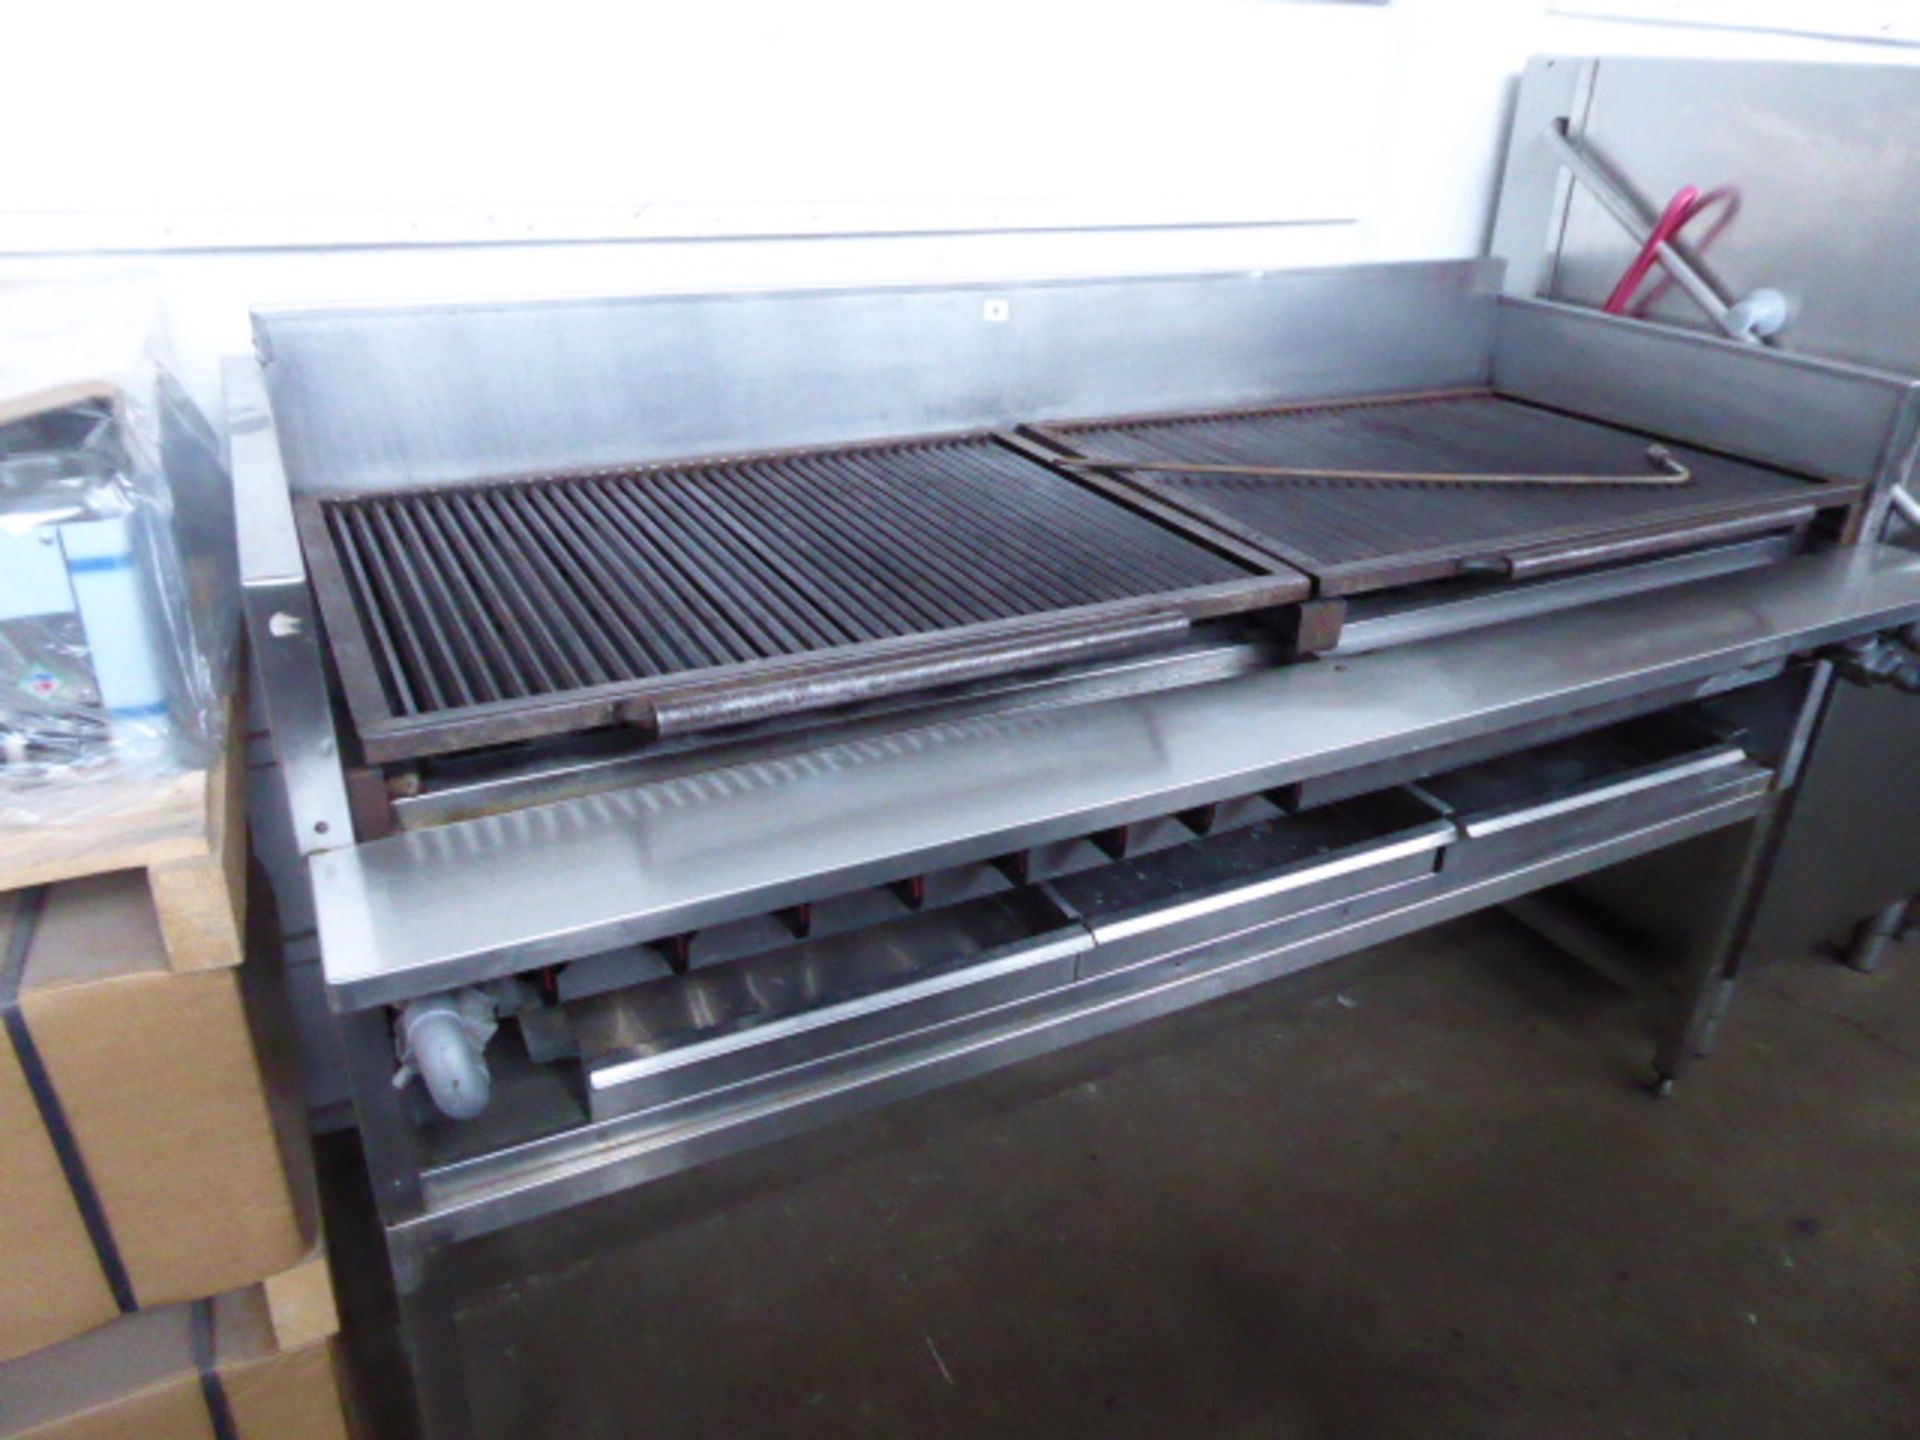 (50) 185cm Magikitch-n inc American style gas char grill with multi burners on custom built table